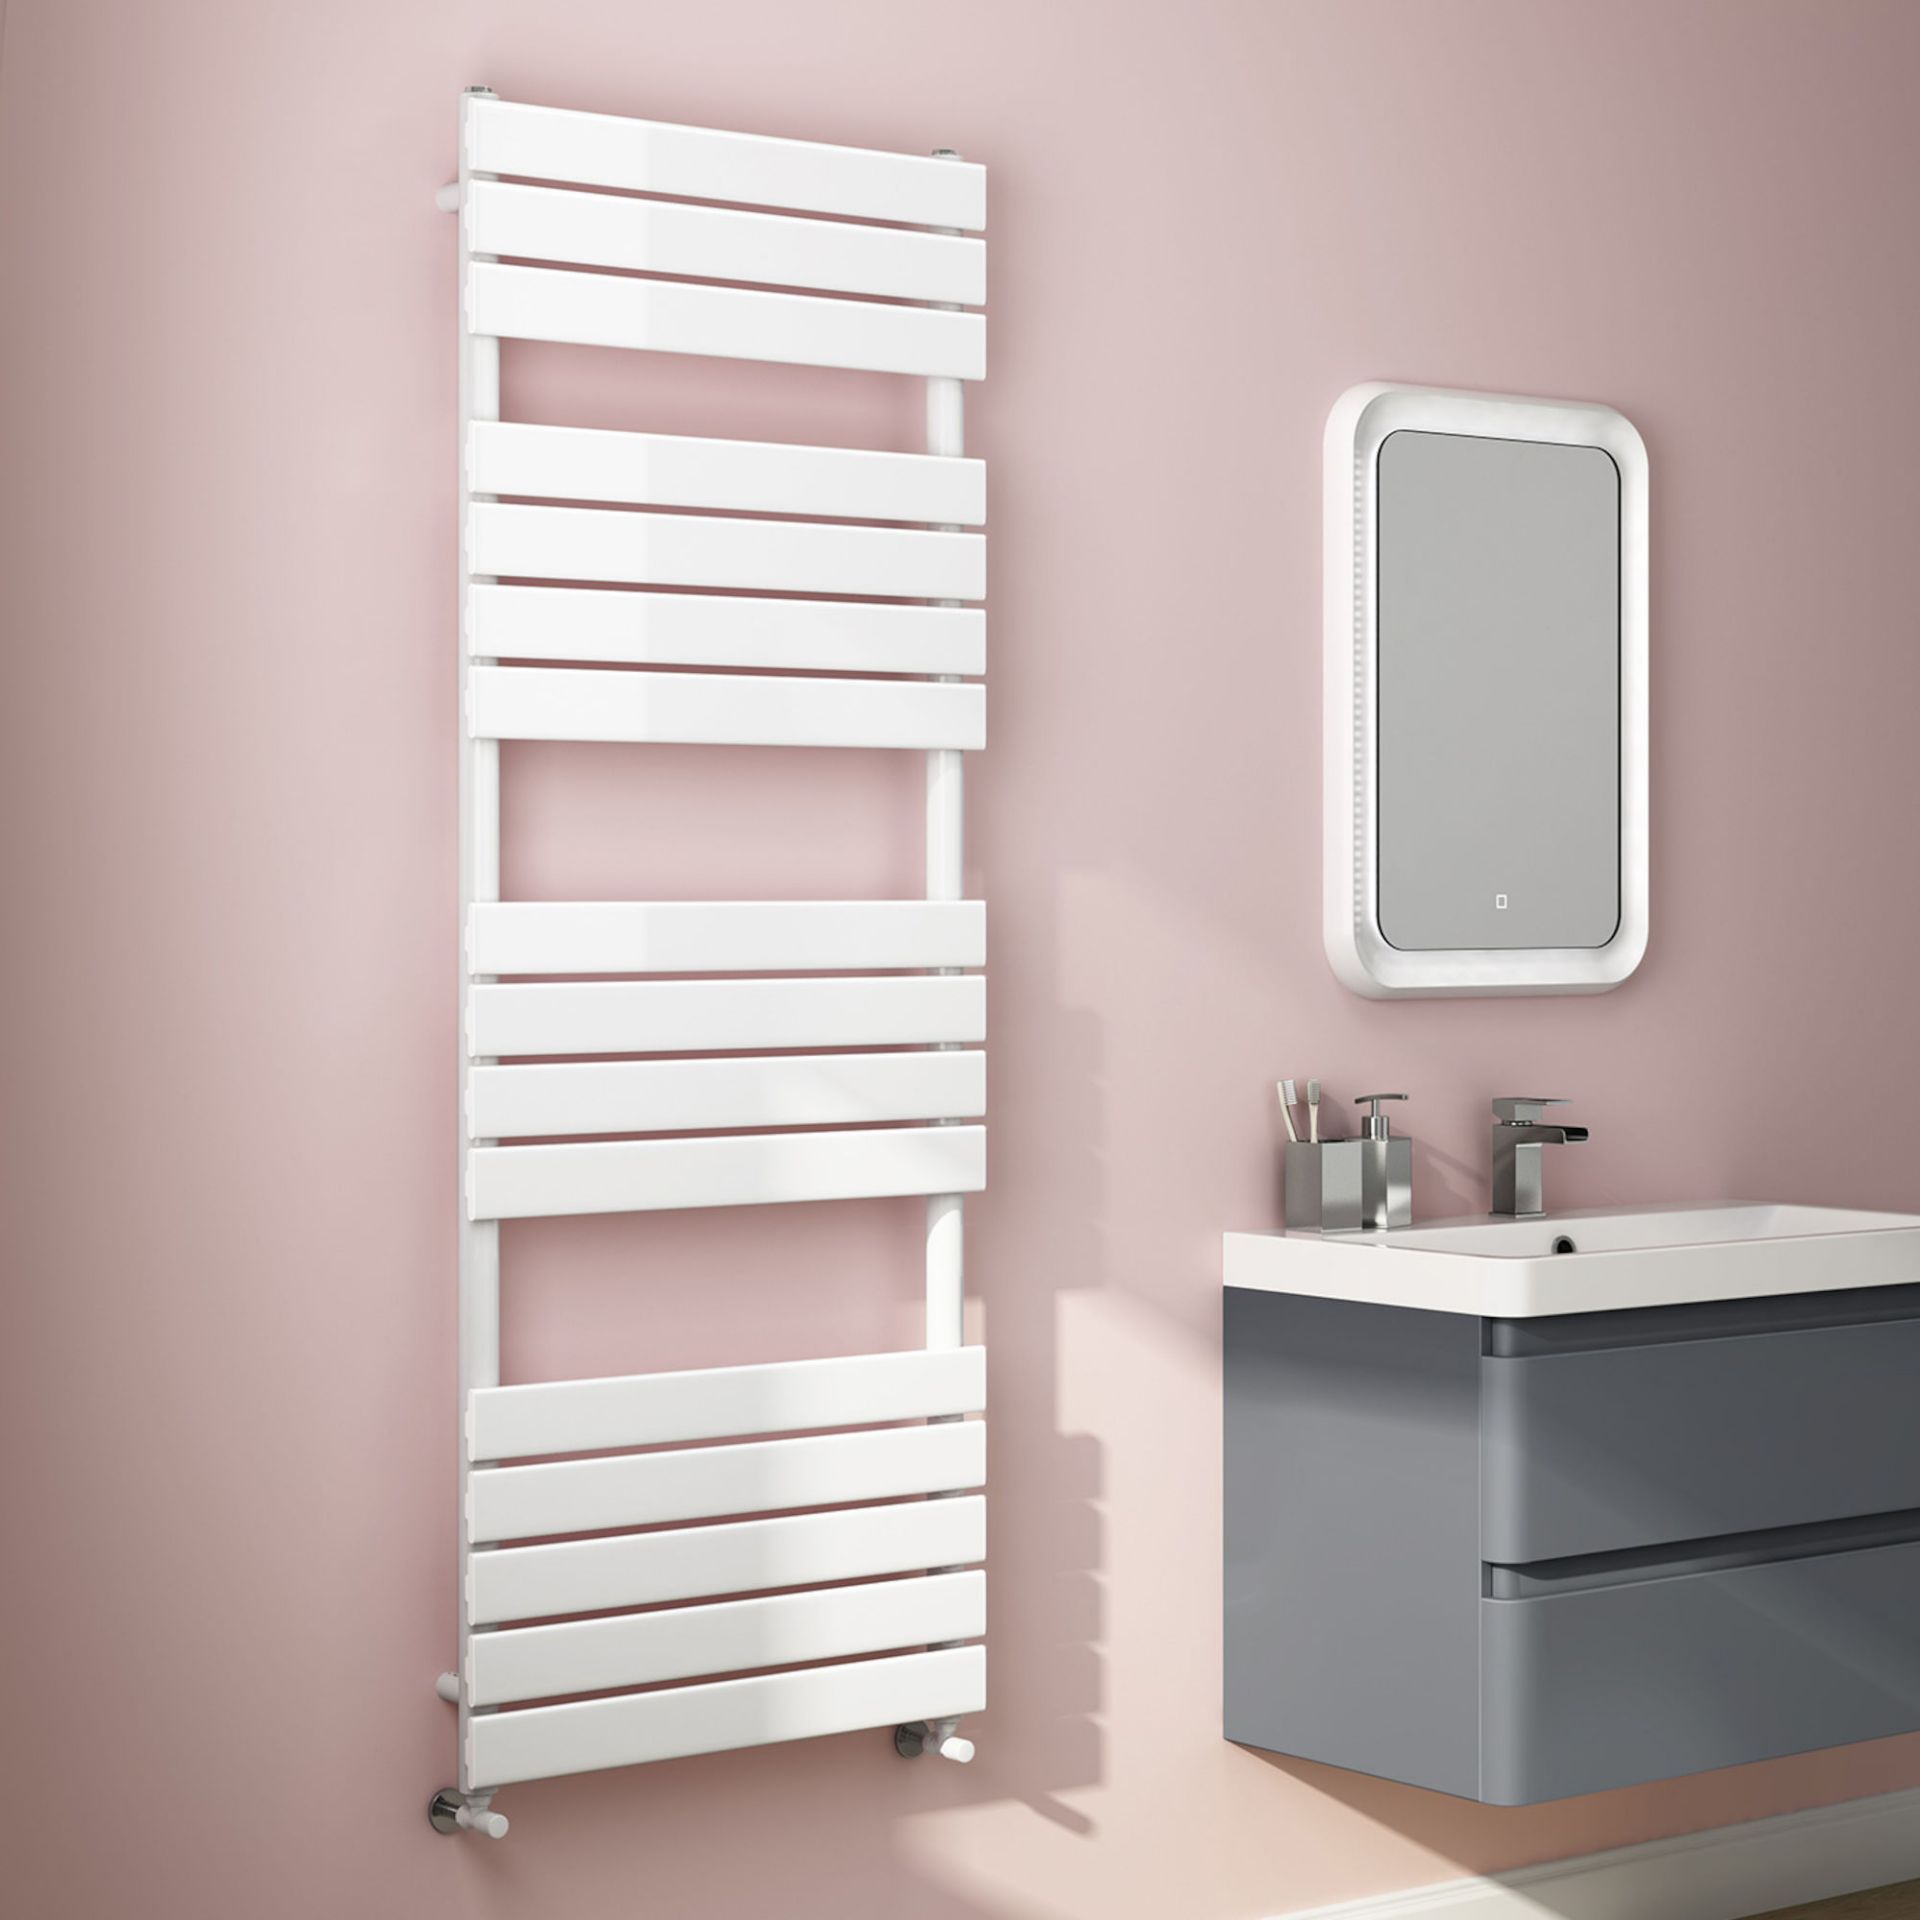 (AD149) 1600x600mm White Flat Panel Ladder Towel Radiator. RRP £329.99. Made from low carbon steel